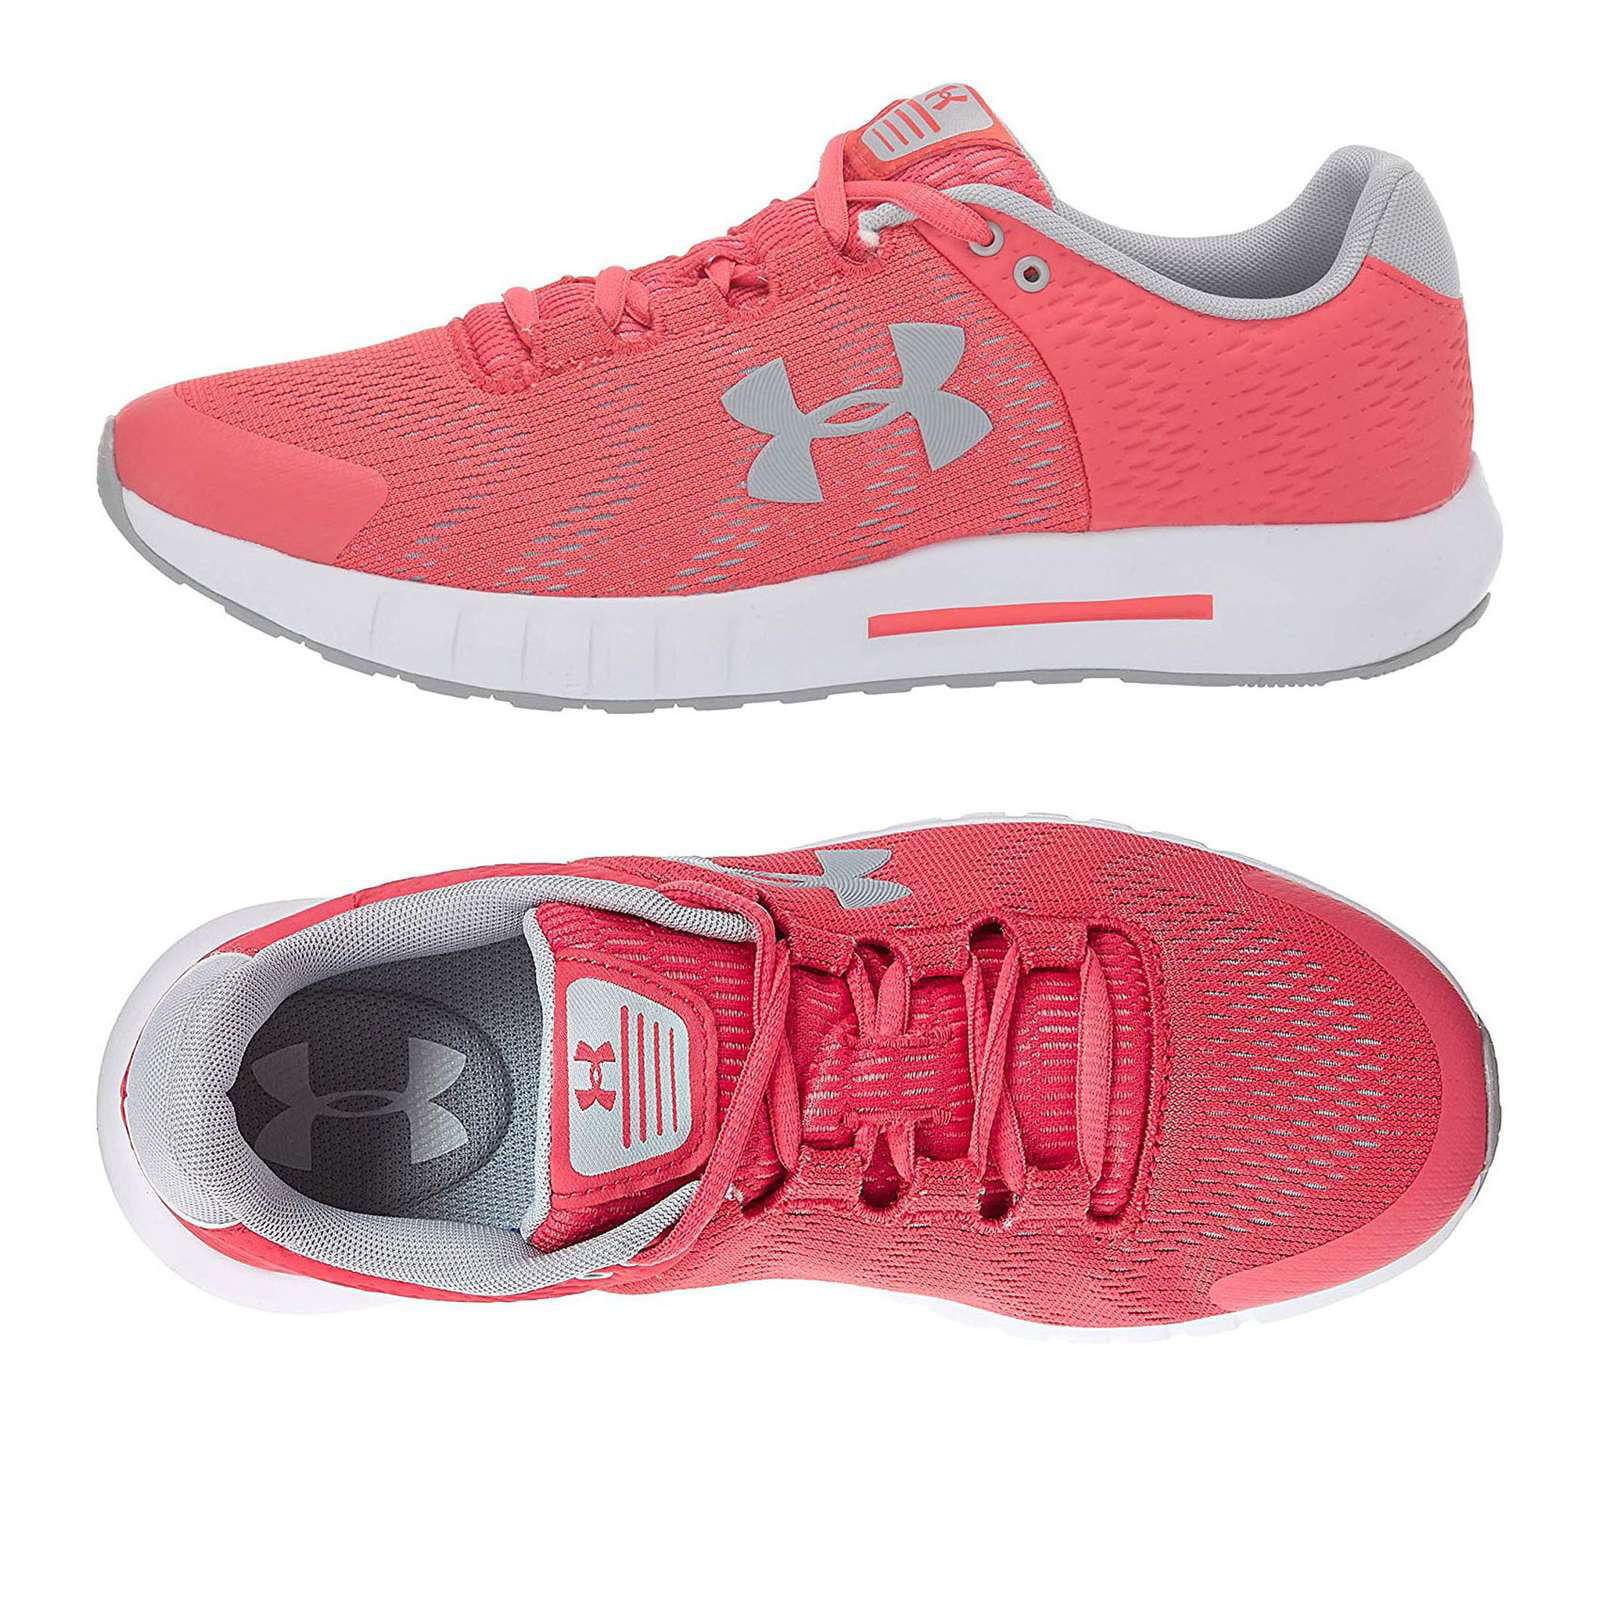 Under Armour Womens Micro G Pursuit Running Shoes Women New 